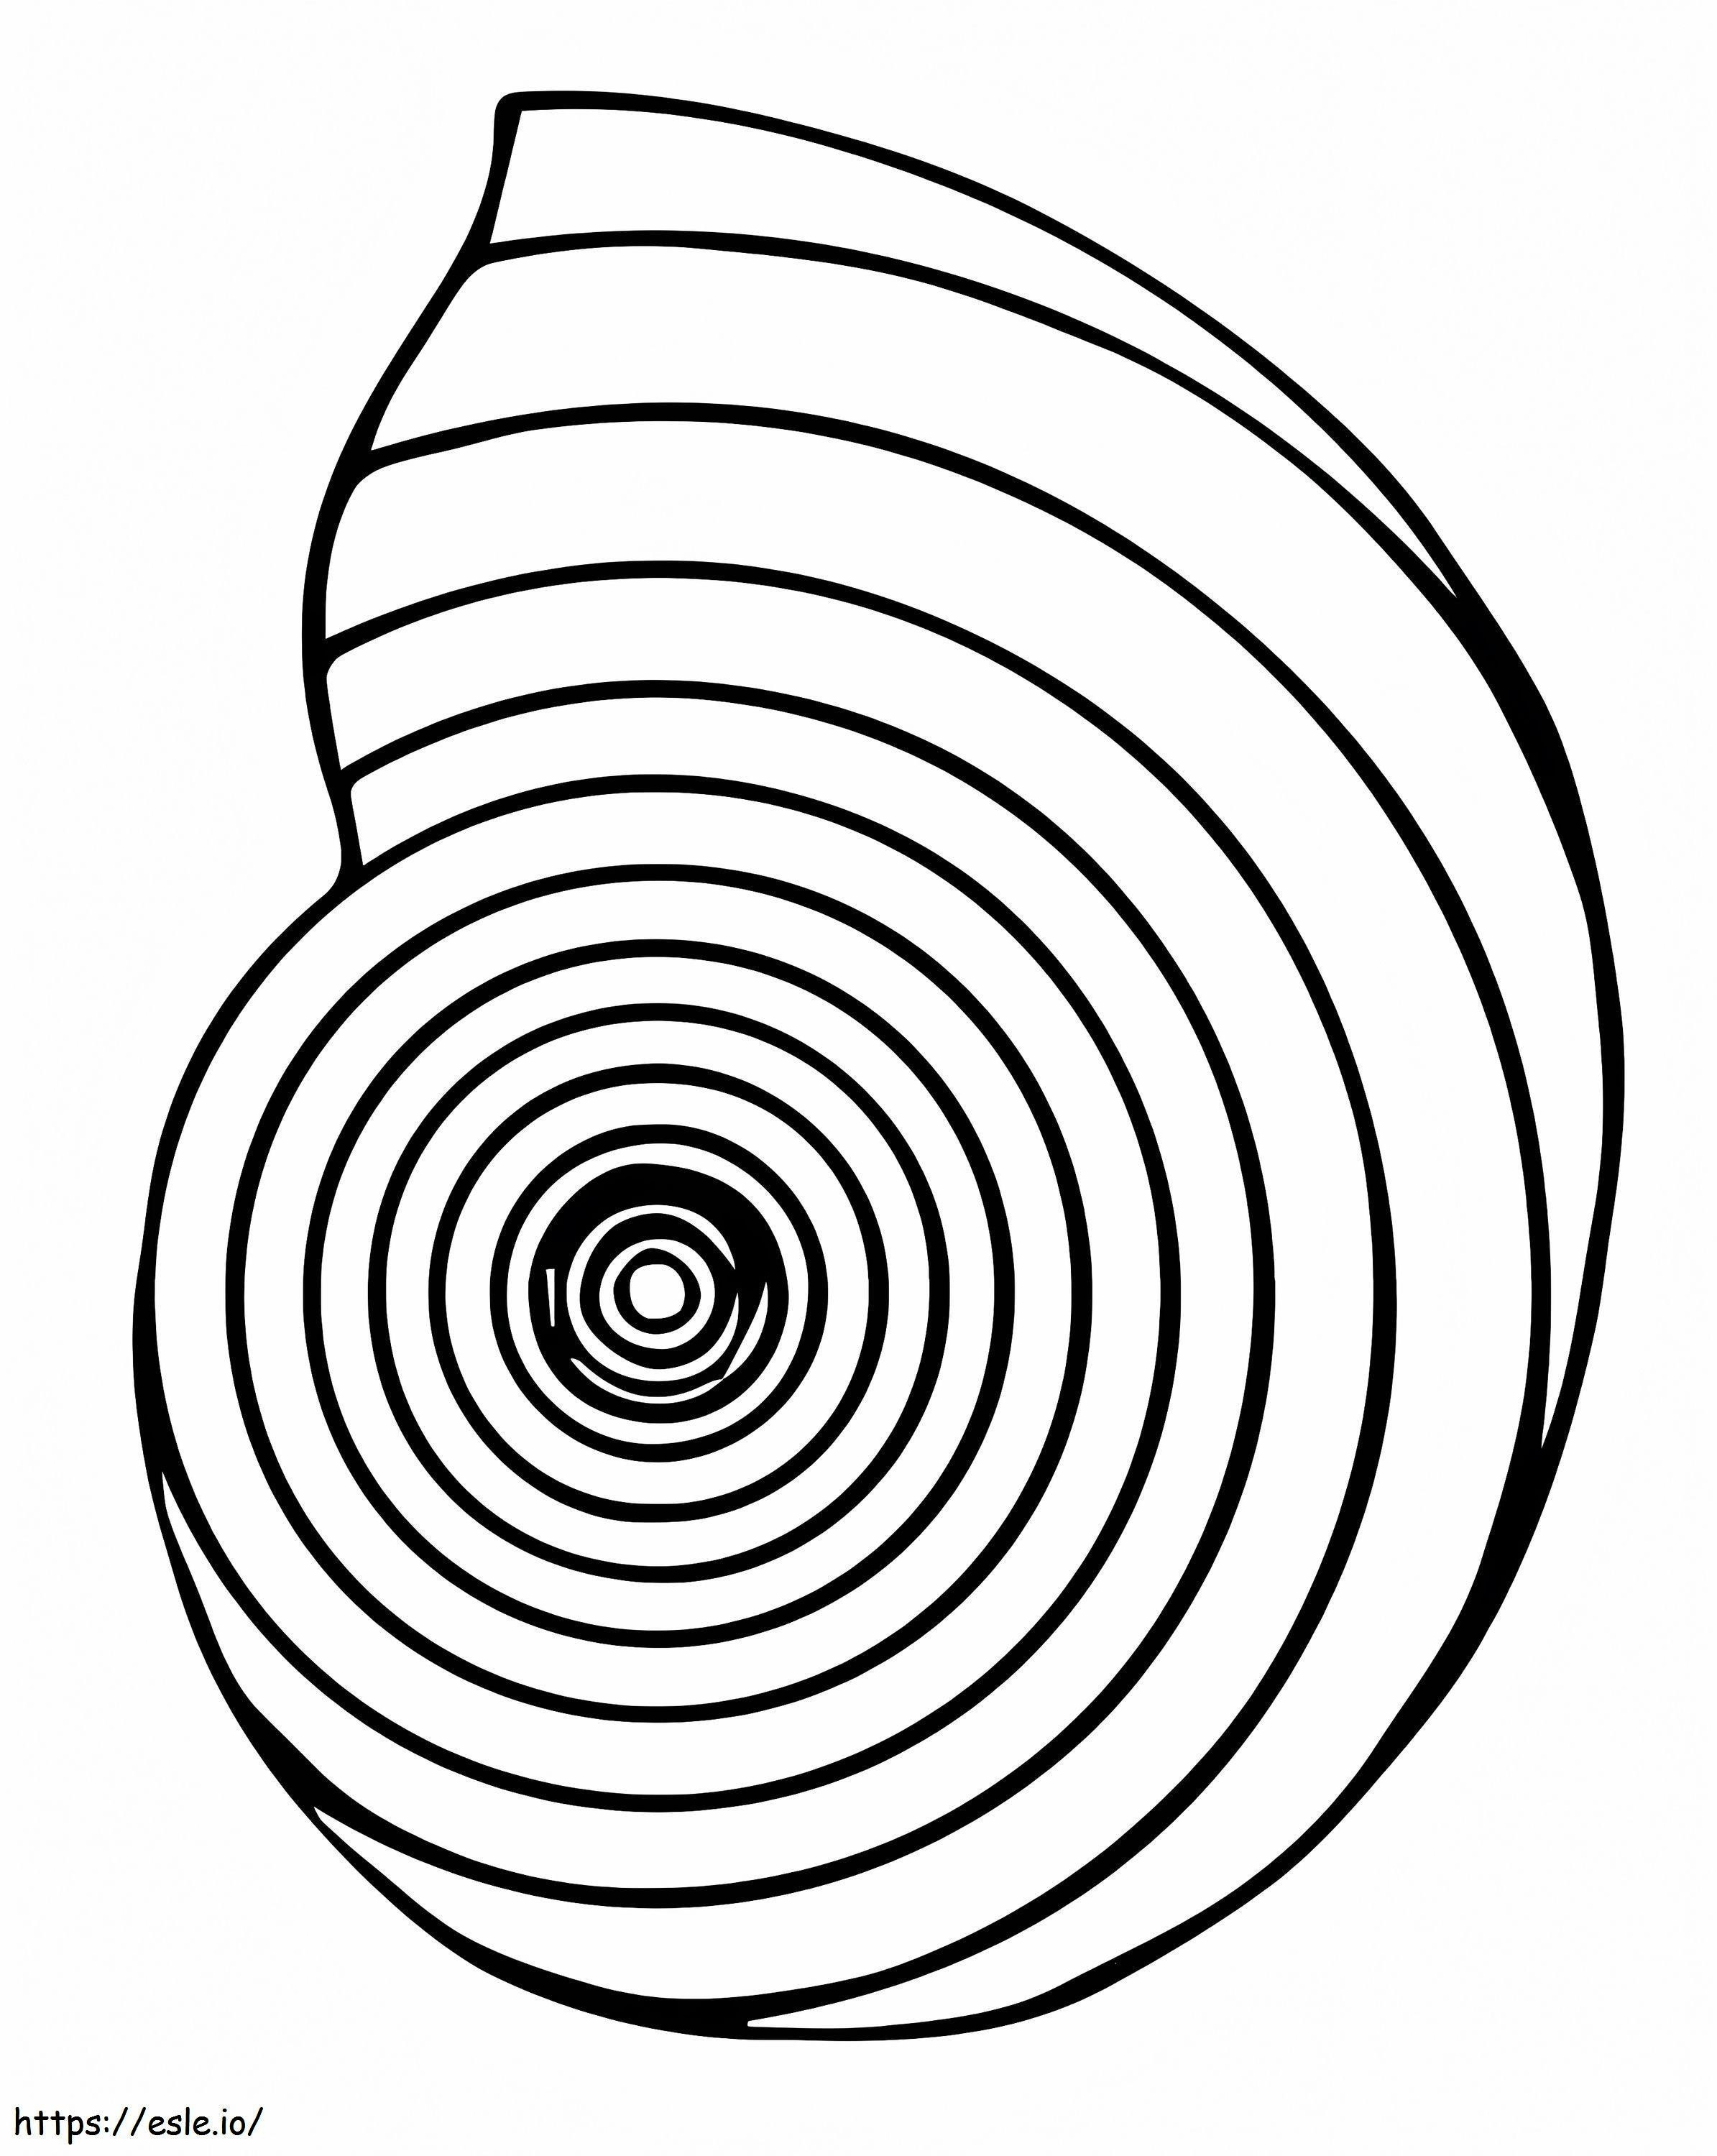 Nautilus Shell coloring page